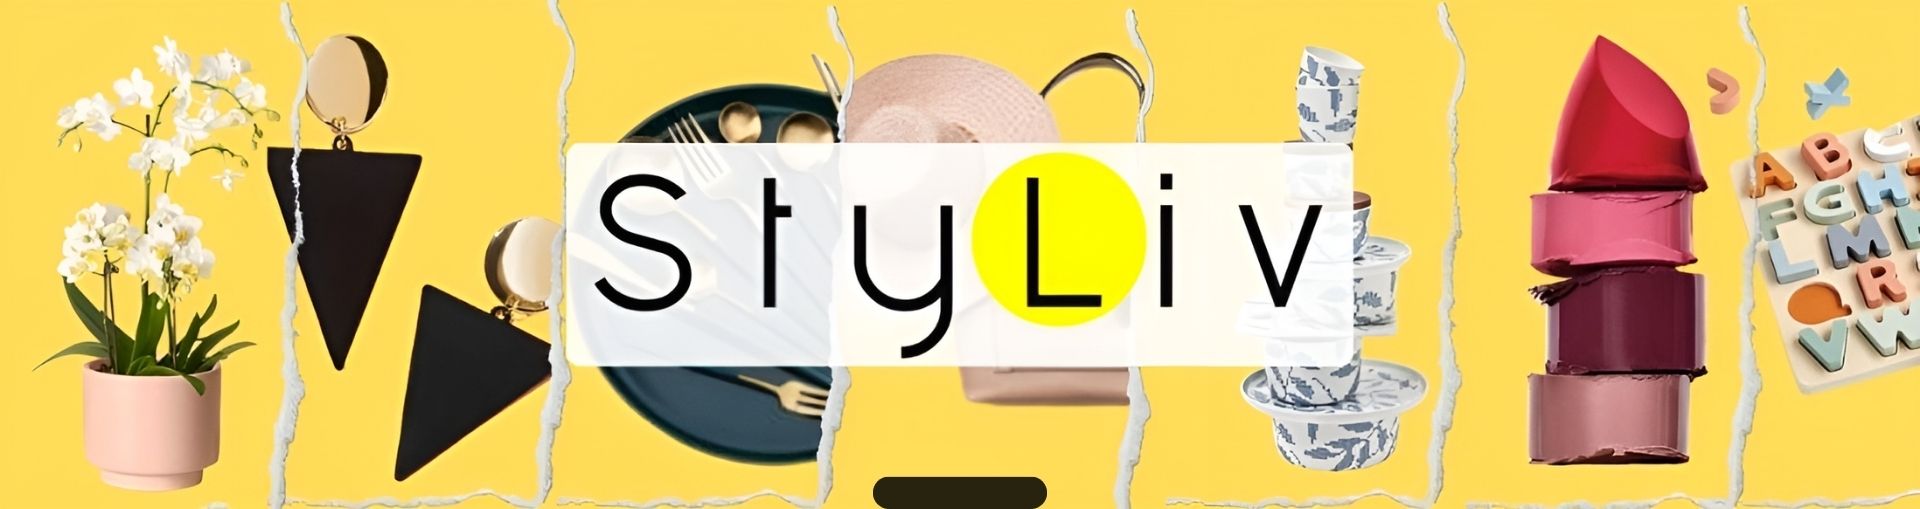 StyLive banner